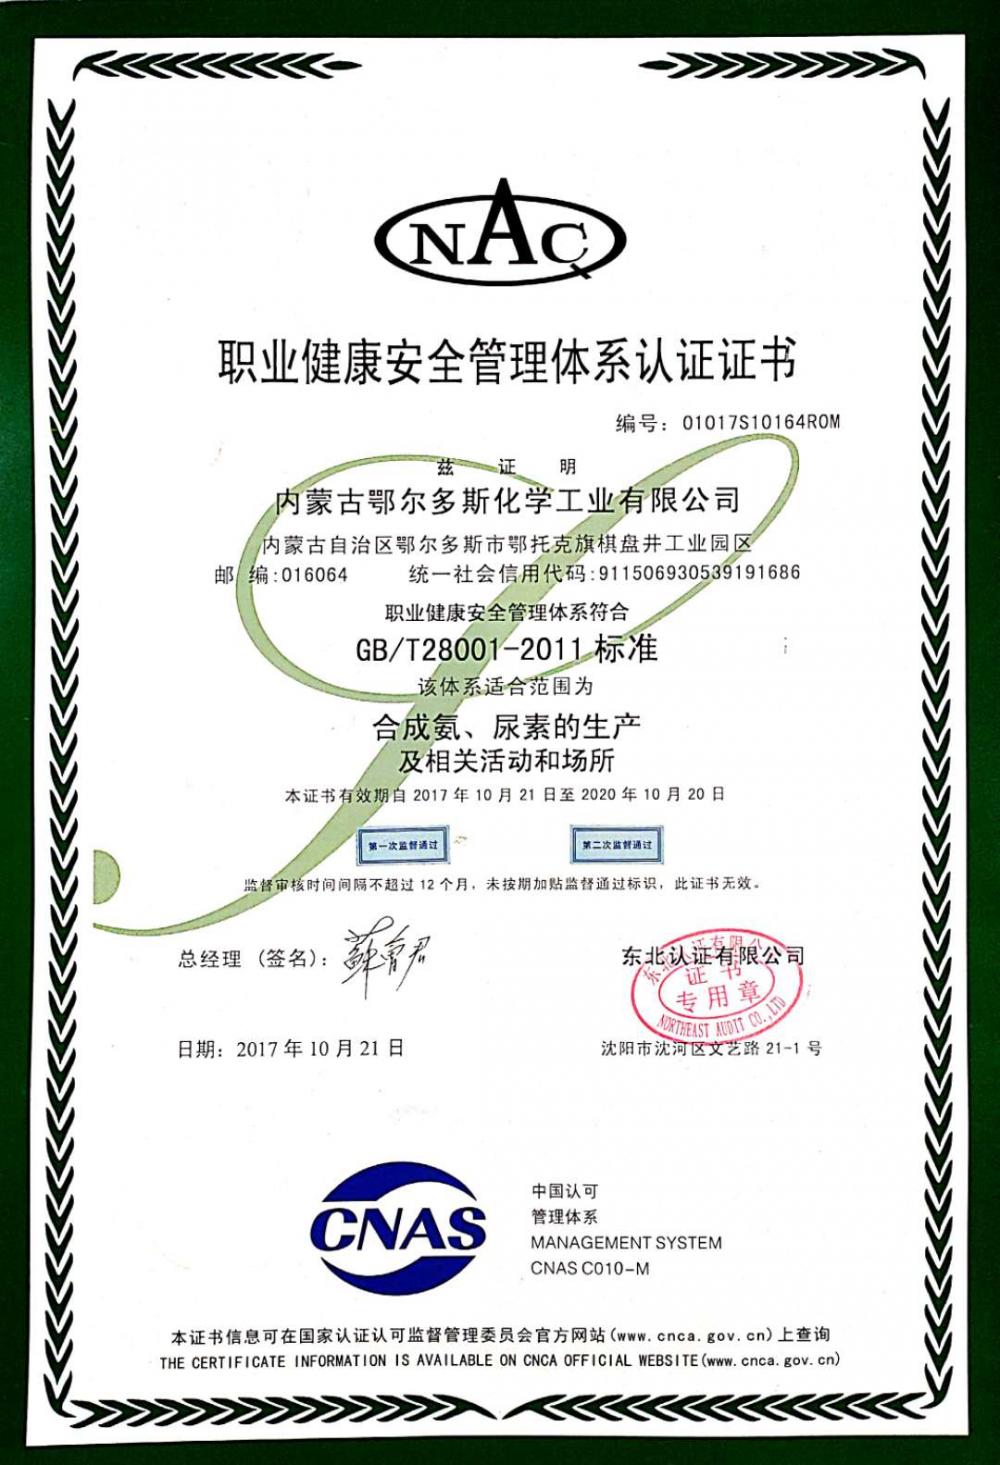 Occupational Health and Safety Management Systems Certificate